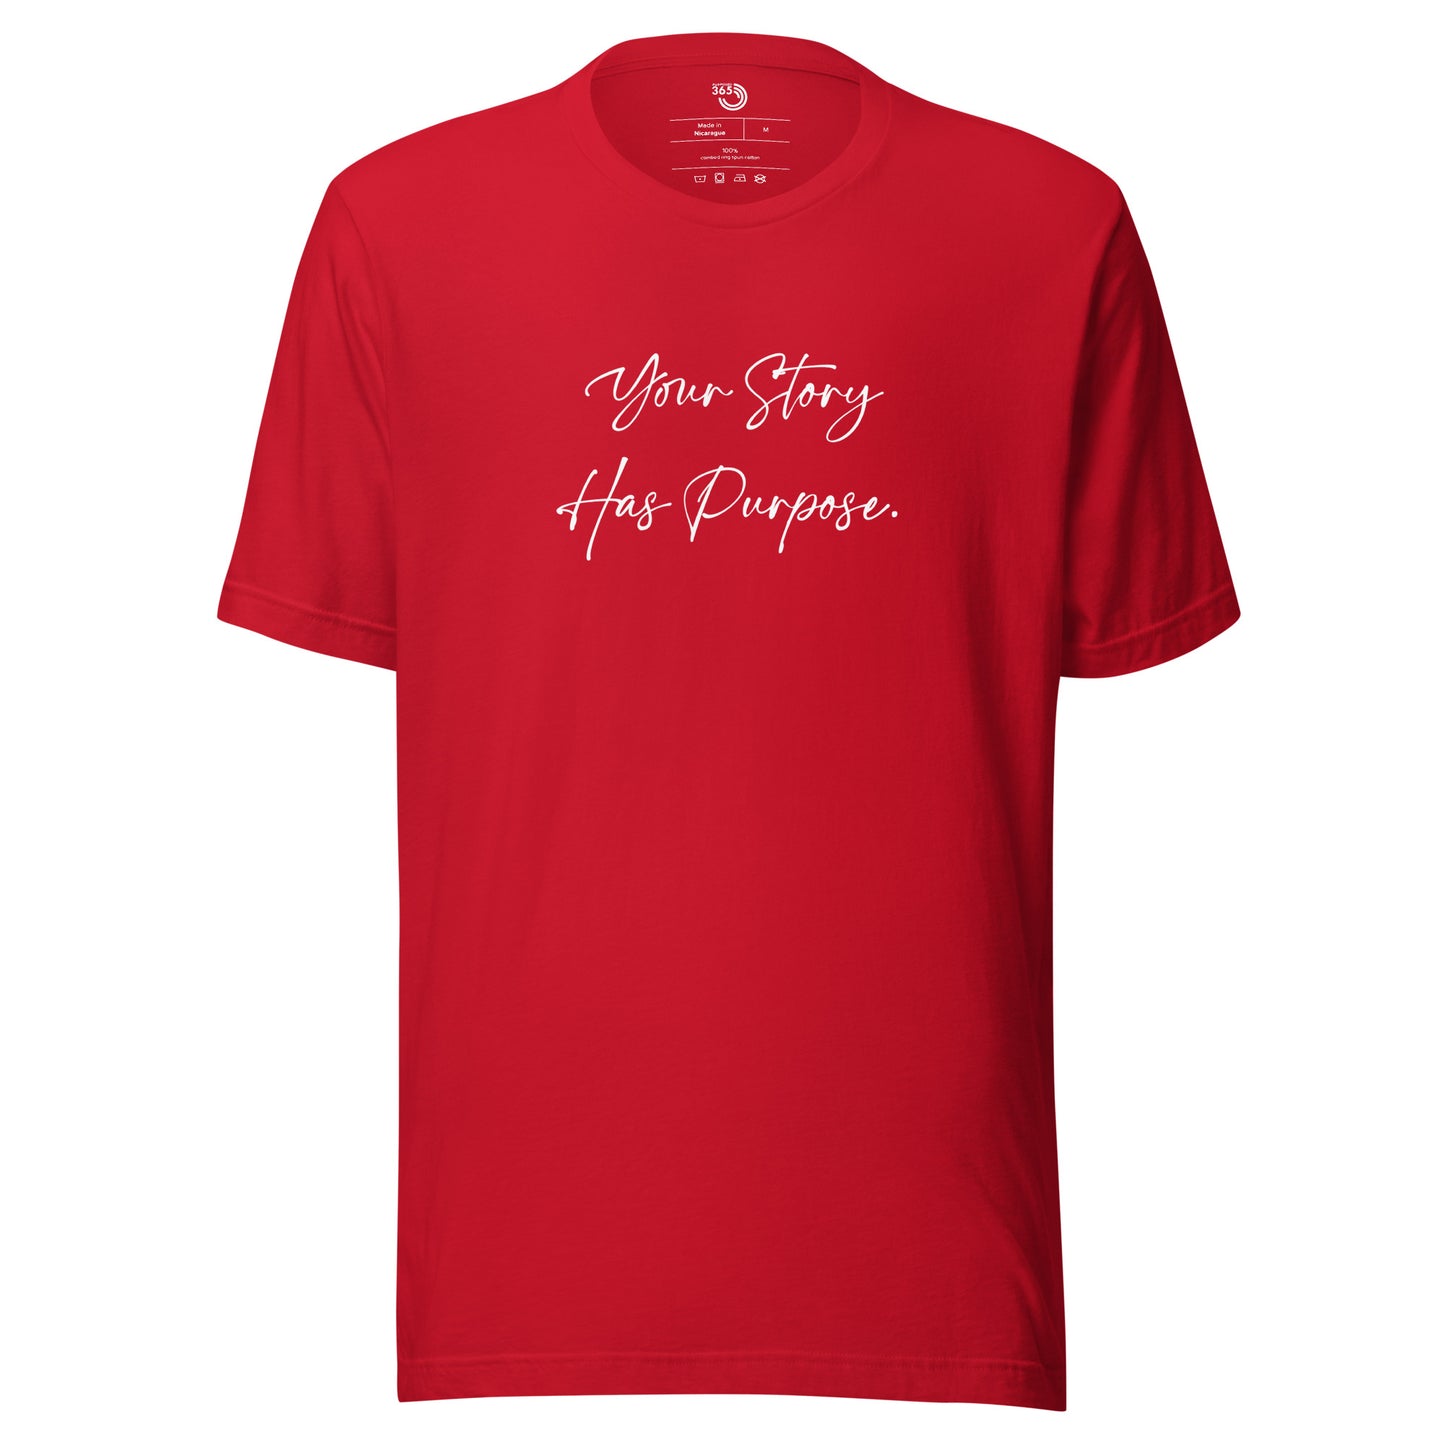 Your Story Has Purpose Tee